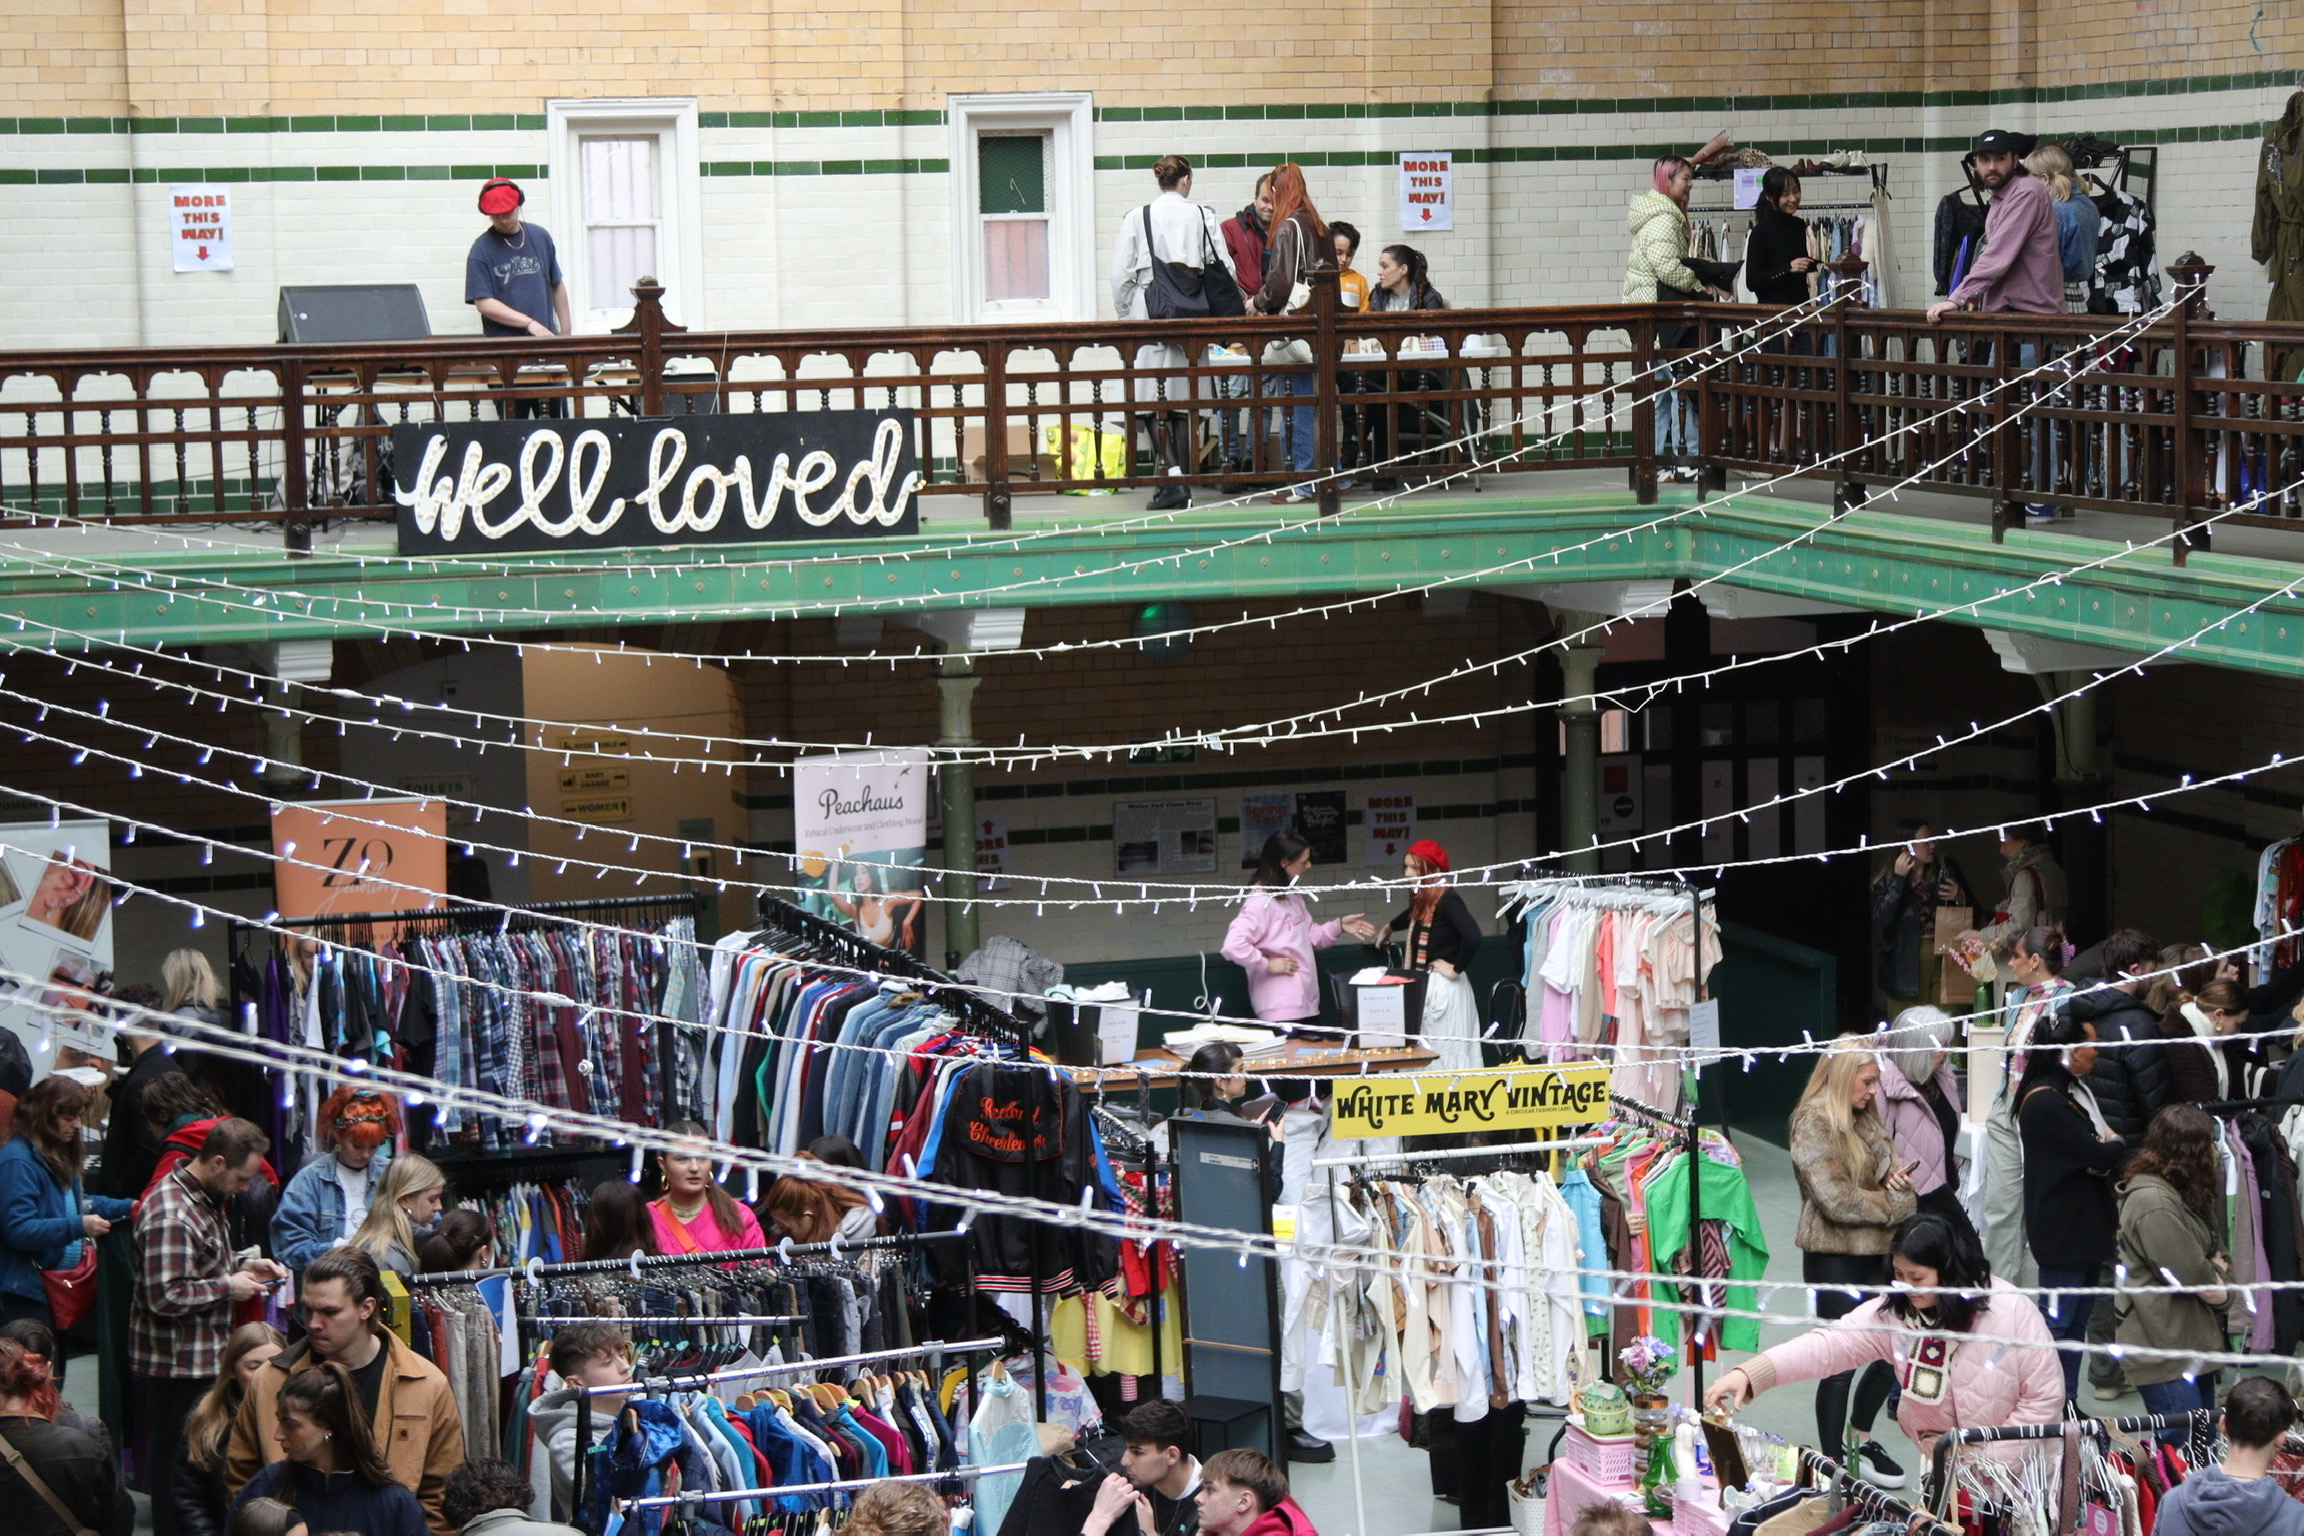 ClothesCycle will bring the UK's largest thrift fair to Manchester this weekend.